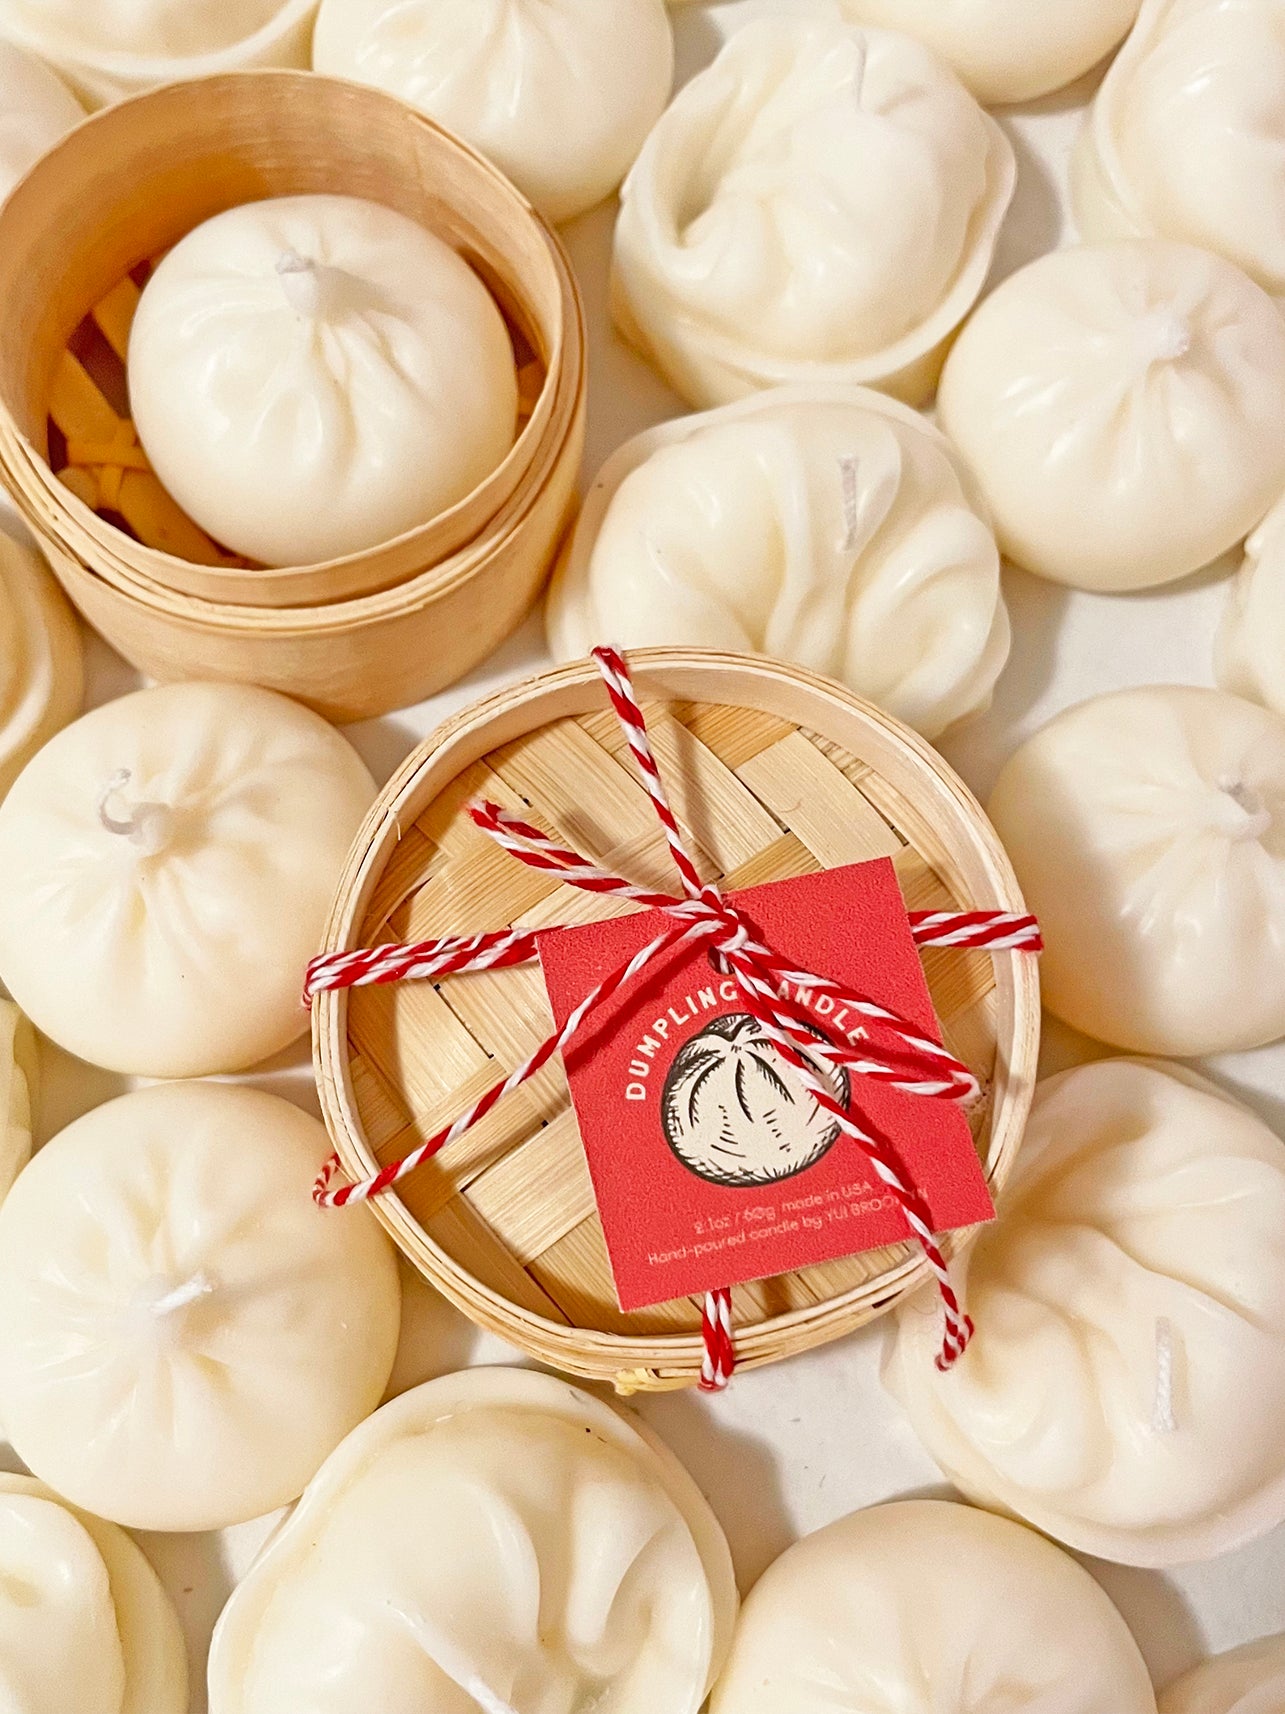 Dumpling Candle Hand poured Soy and Beeswax YUI BROOKLYN【NY Local Business】